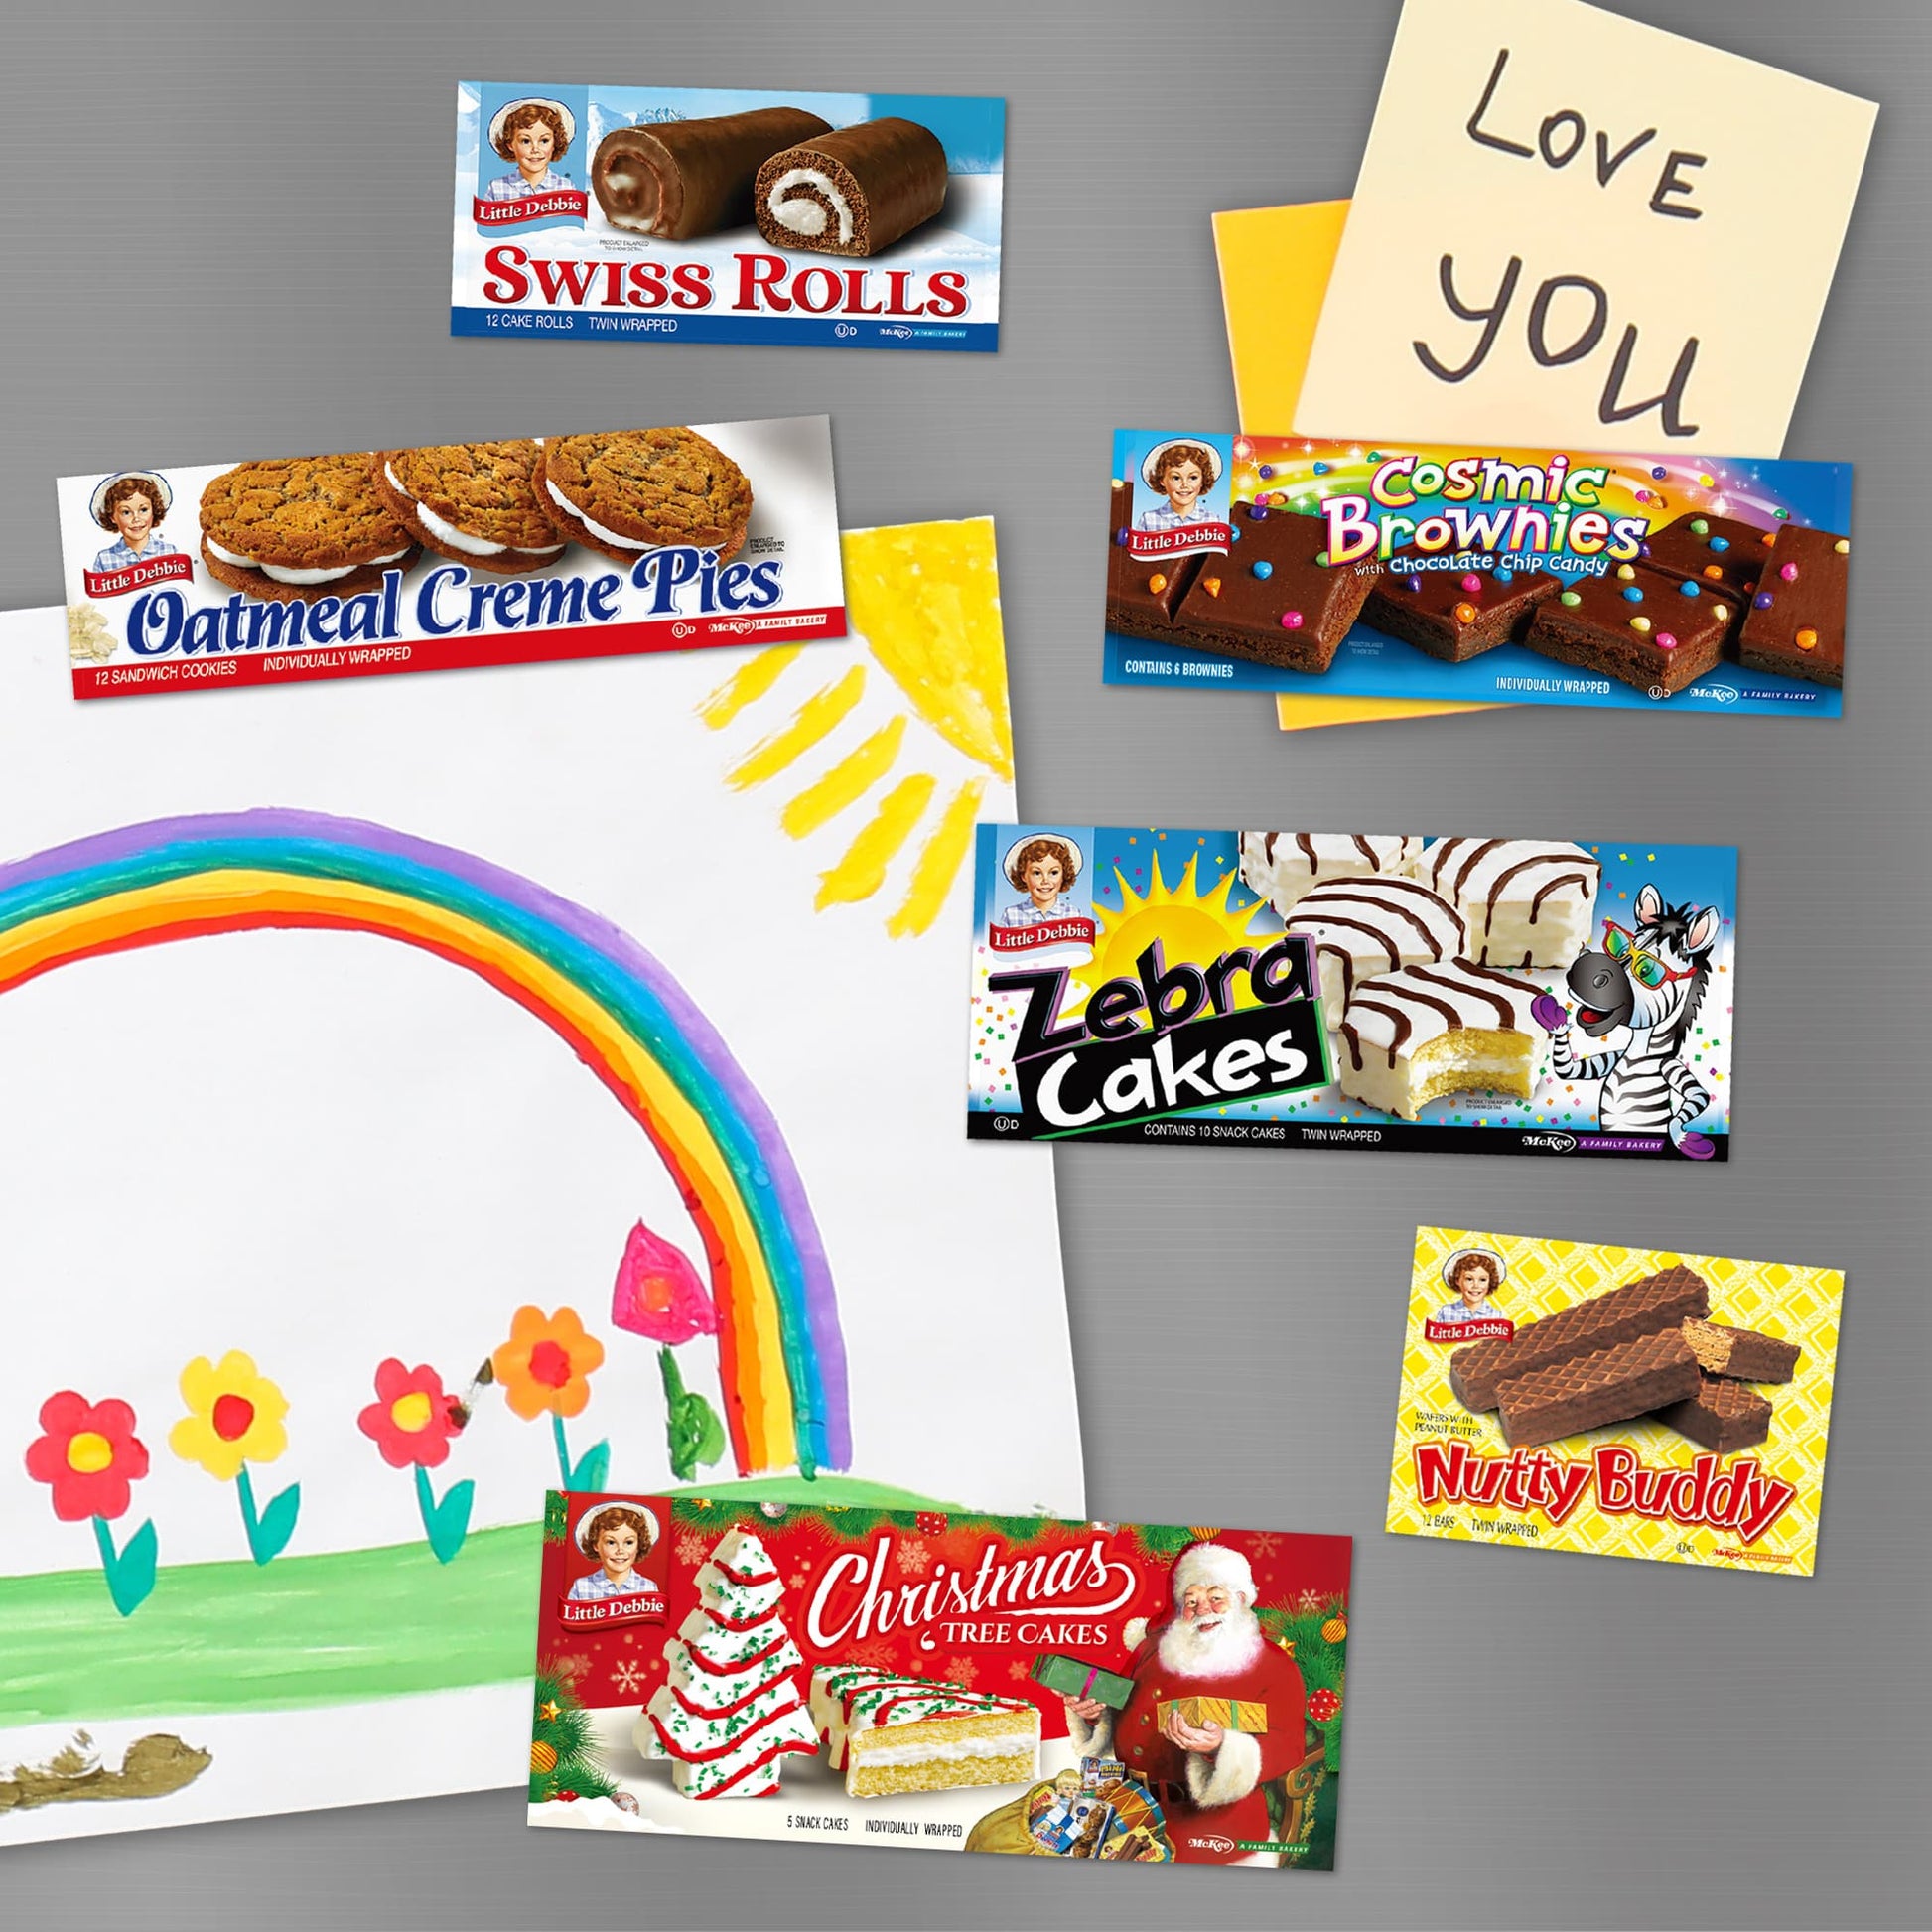 Collection of Little Debbie snack carton magnets arranged on a silver background, featuring popular treats. The set includes Swiss Rolls, Oatmeal Creme Pies, Cosmic Brownies, Zebra Cakes, Christmas Tree Cakes, and Nutty Buddy. Each magnet is a colorful replica of the snack's original packaging. A hand-drawn childlike illustration of a rainbow with flowers and a 'Love You' note on yellow paper are also part of the playful display.